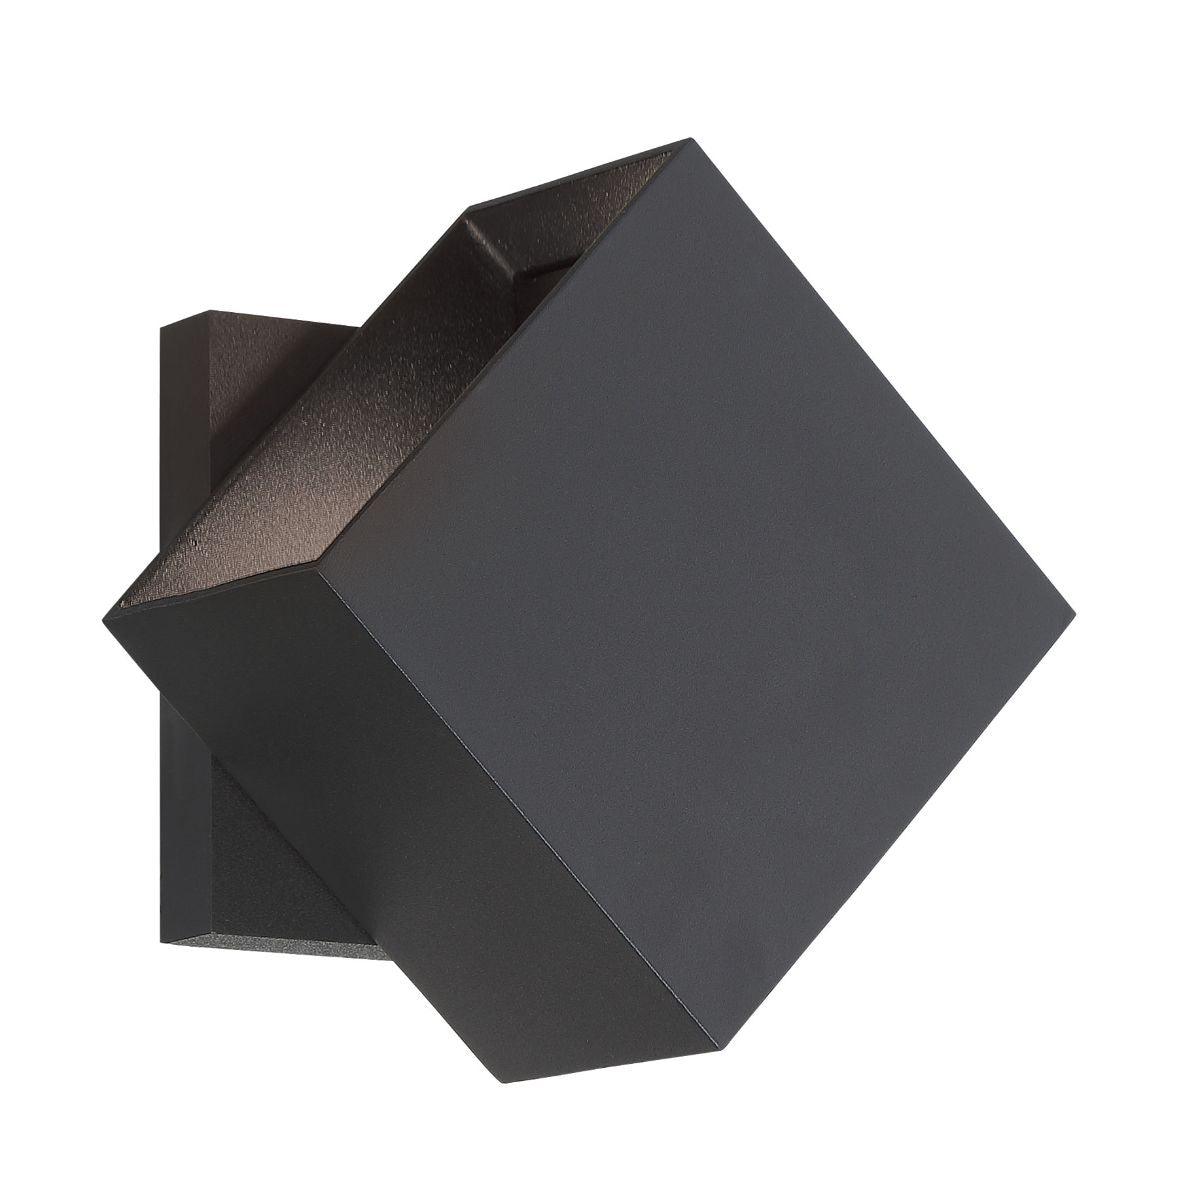 Revolve 5 in. 2 Lights LED Outdoor Wall Sconce Black Finish